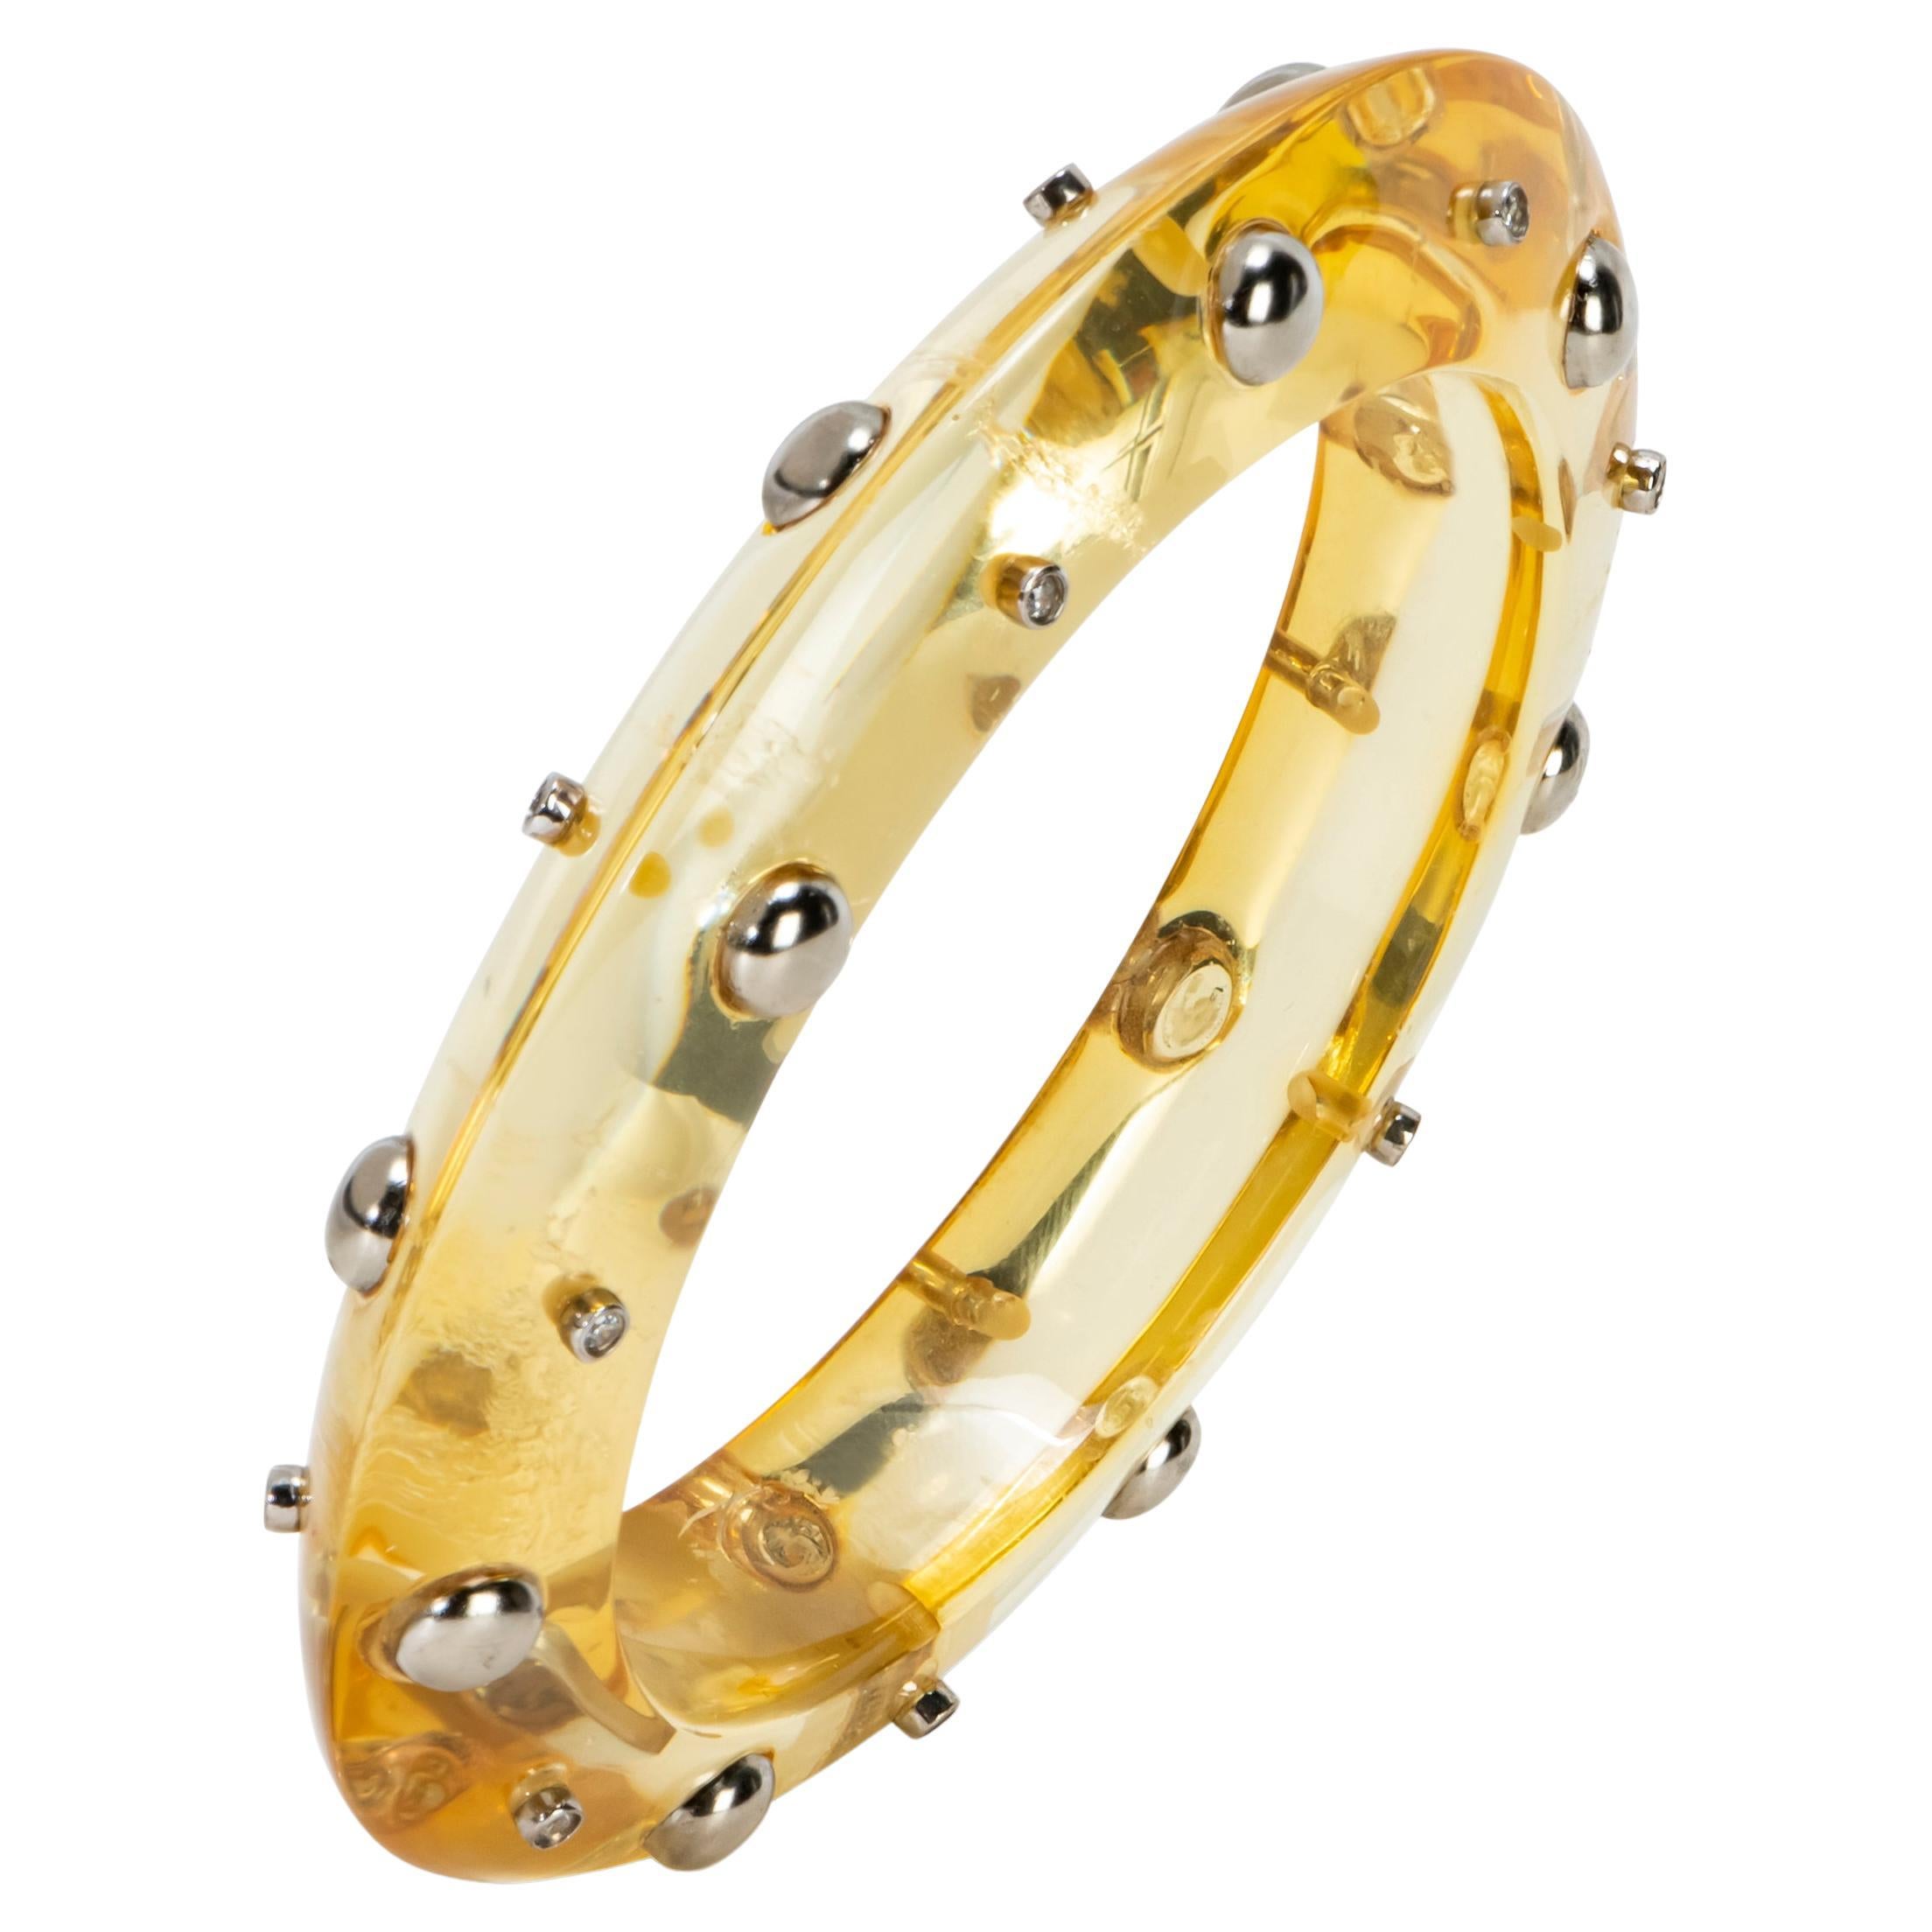 Miriam Salat Studded Translucent Vintage Resin Bangle made in Silver and Resin